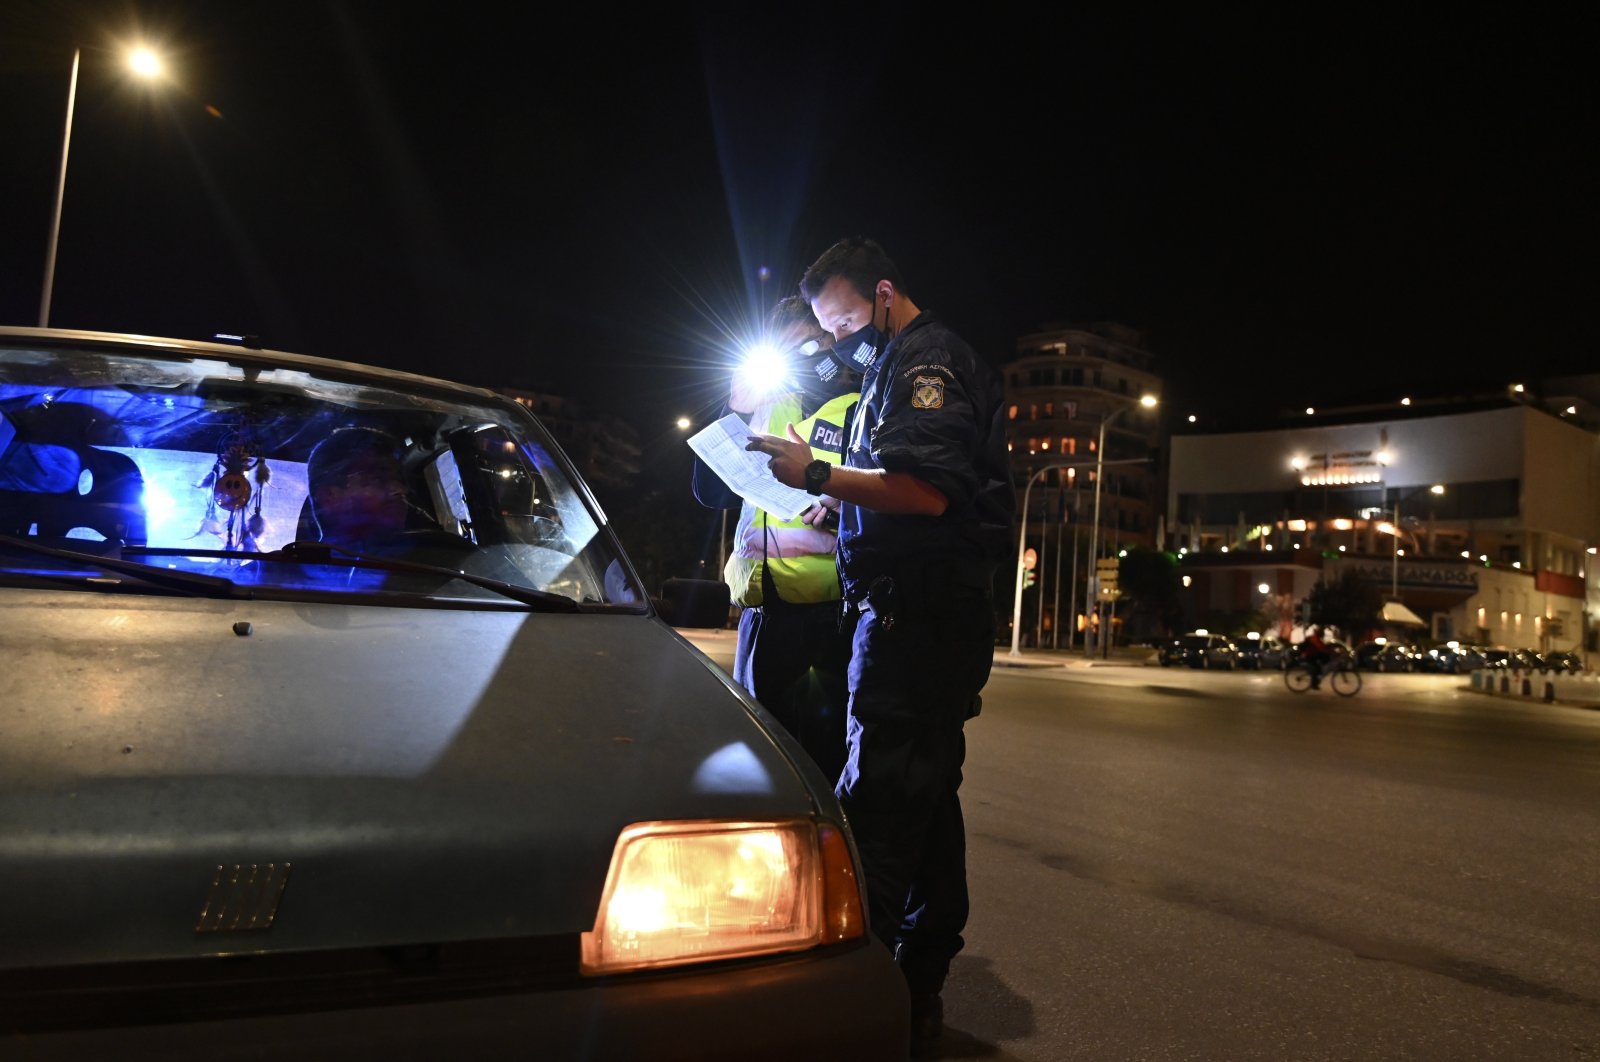 Police check the documents of a driver during the lockdown to contain the spread of COVID-19 in the northern city of Thessaloniki, Greece, Tuesday, Nov. 3, 2020. (AP Photo)